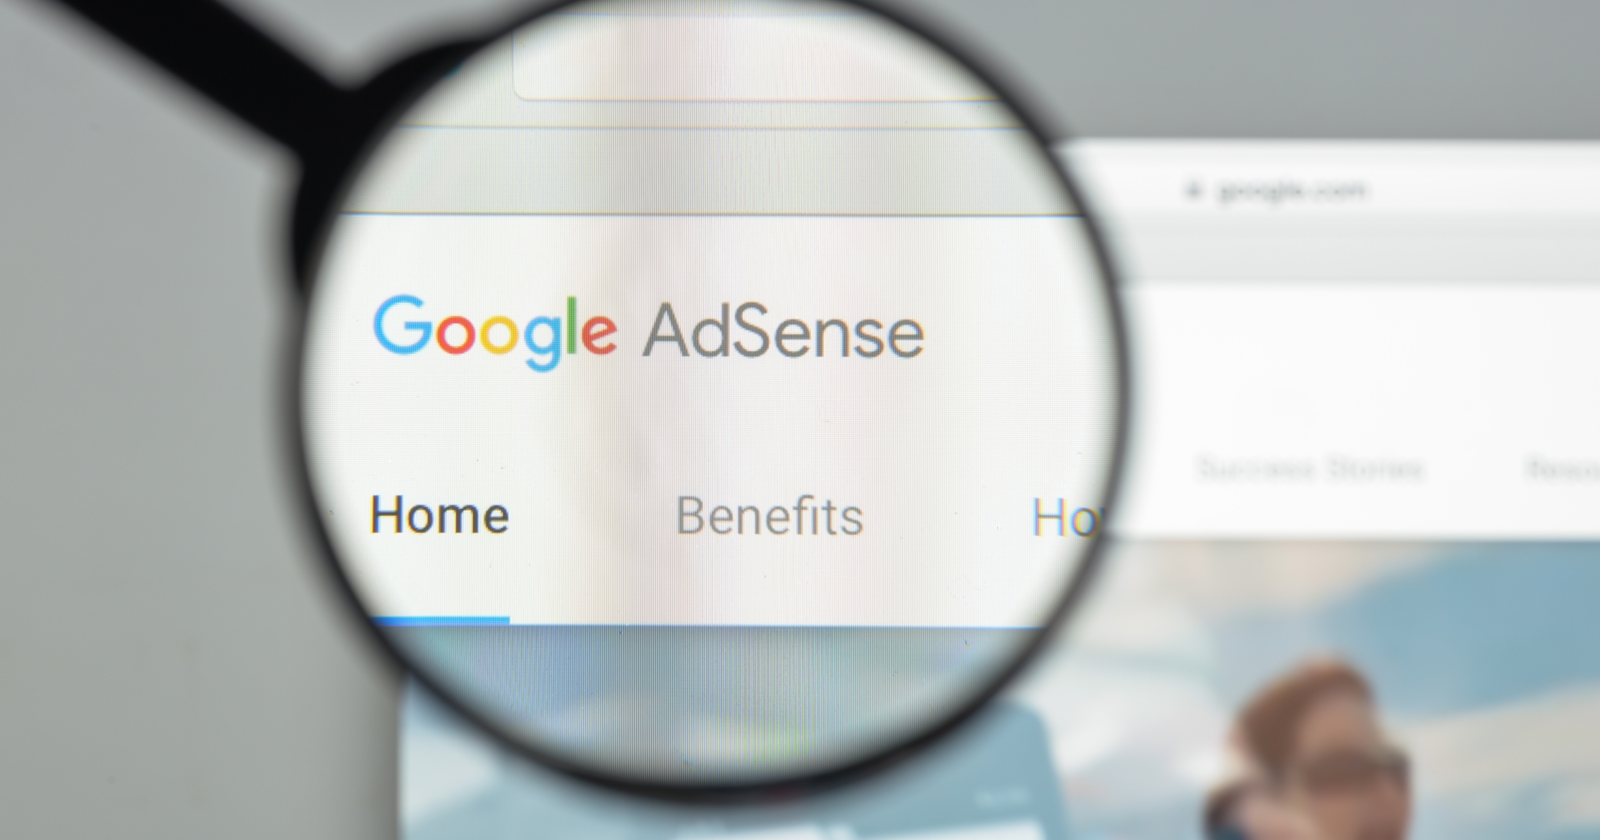 Google Adsense is a program that enables websites to earn money from advertising.